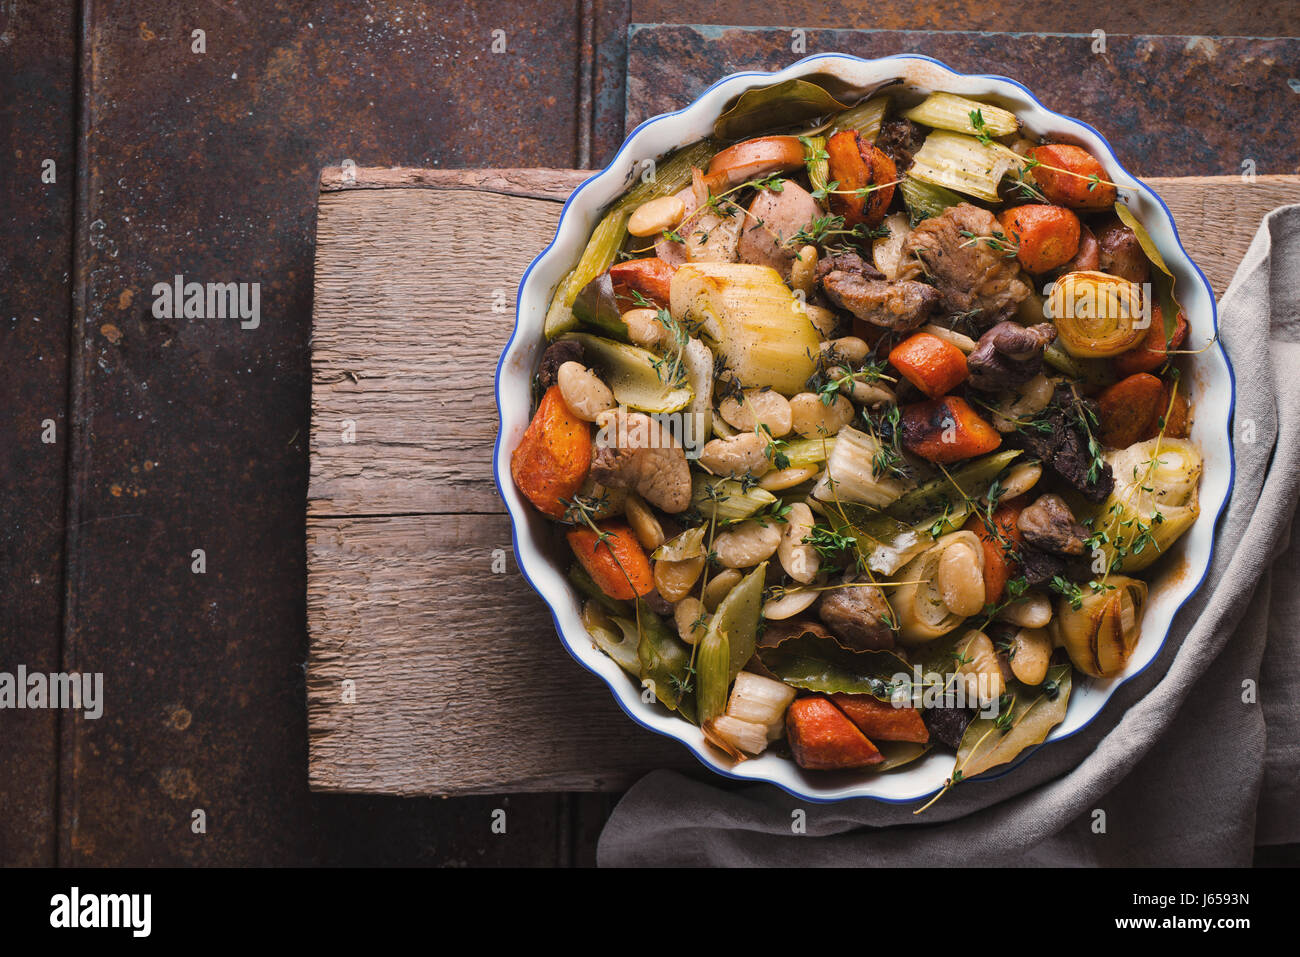 Ready-made kasul with pork and lamb and vegetables Stock Photo